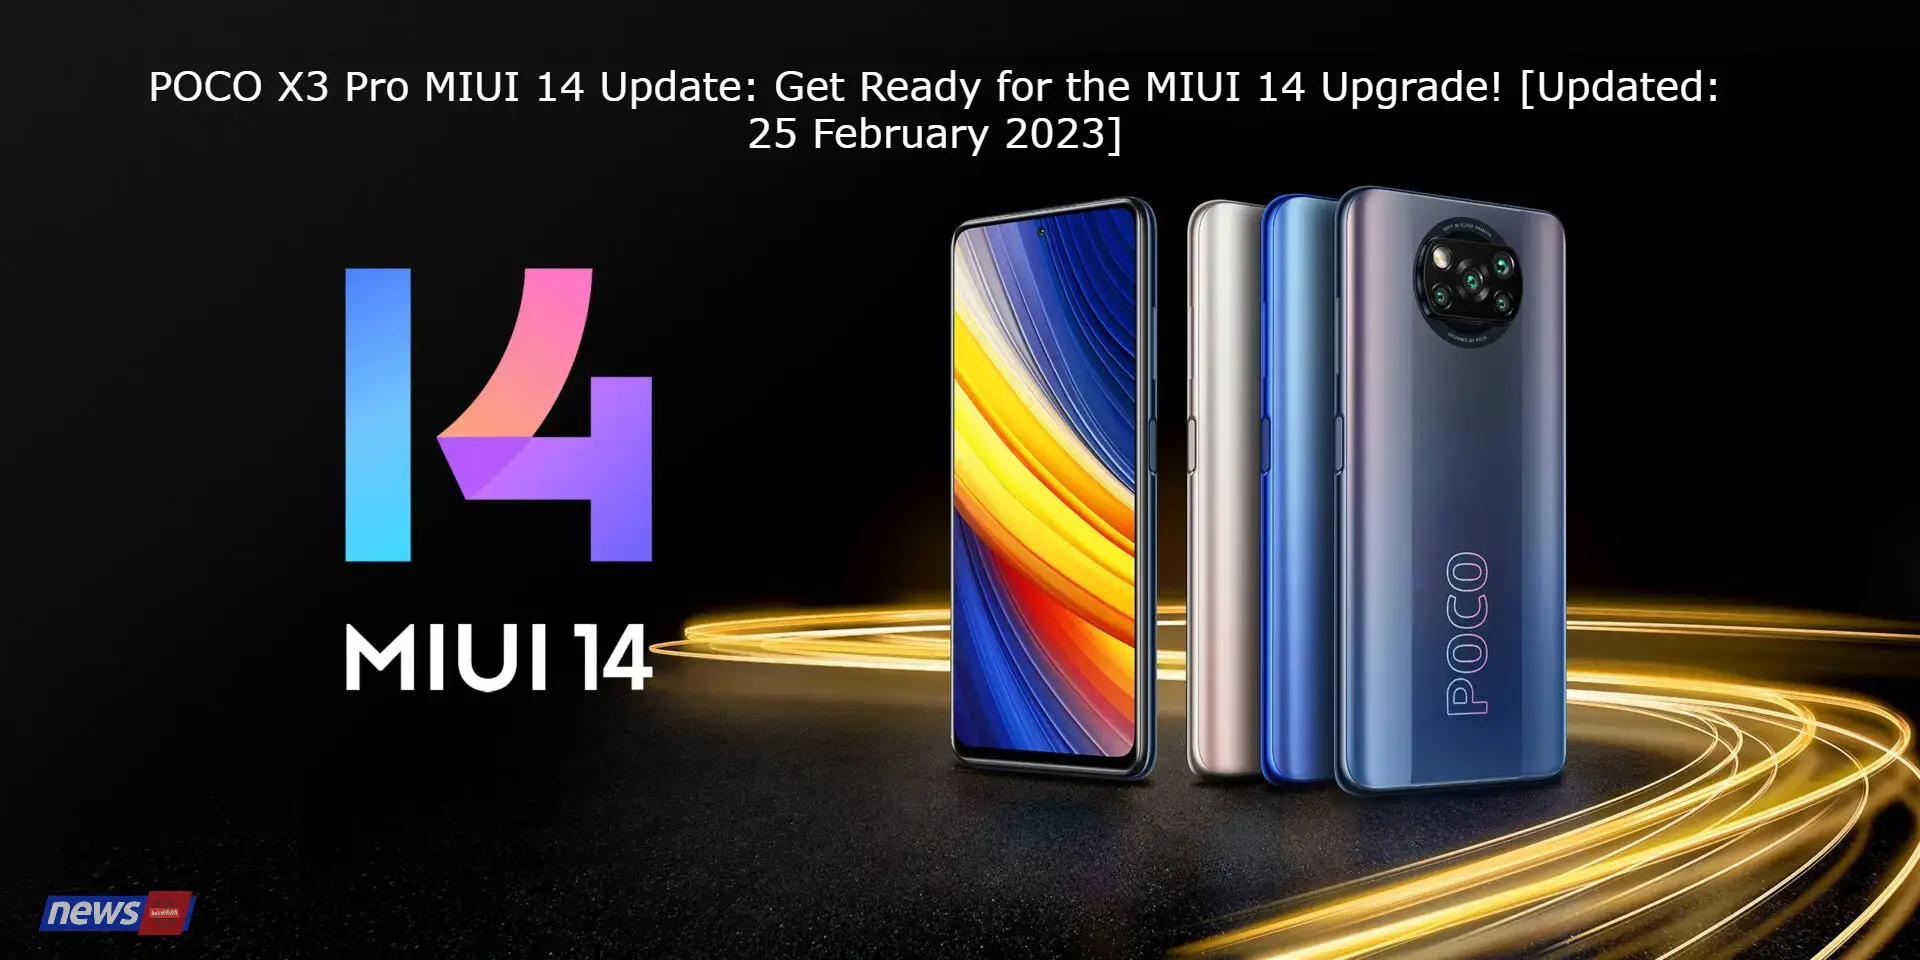 POCO X3 Pro MIUI 14 Update: Get Ready for the MIUI 14 Upgrade! [Updated: 25 February 2023]